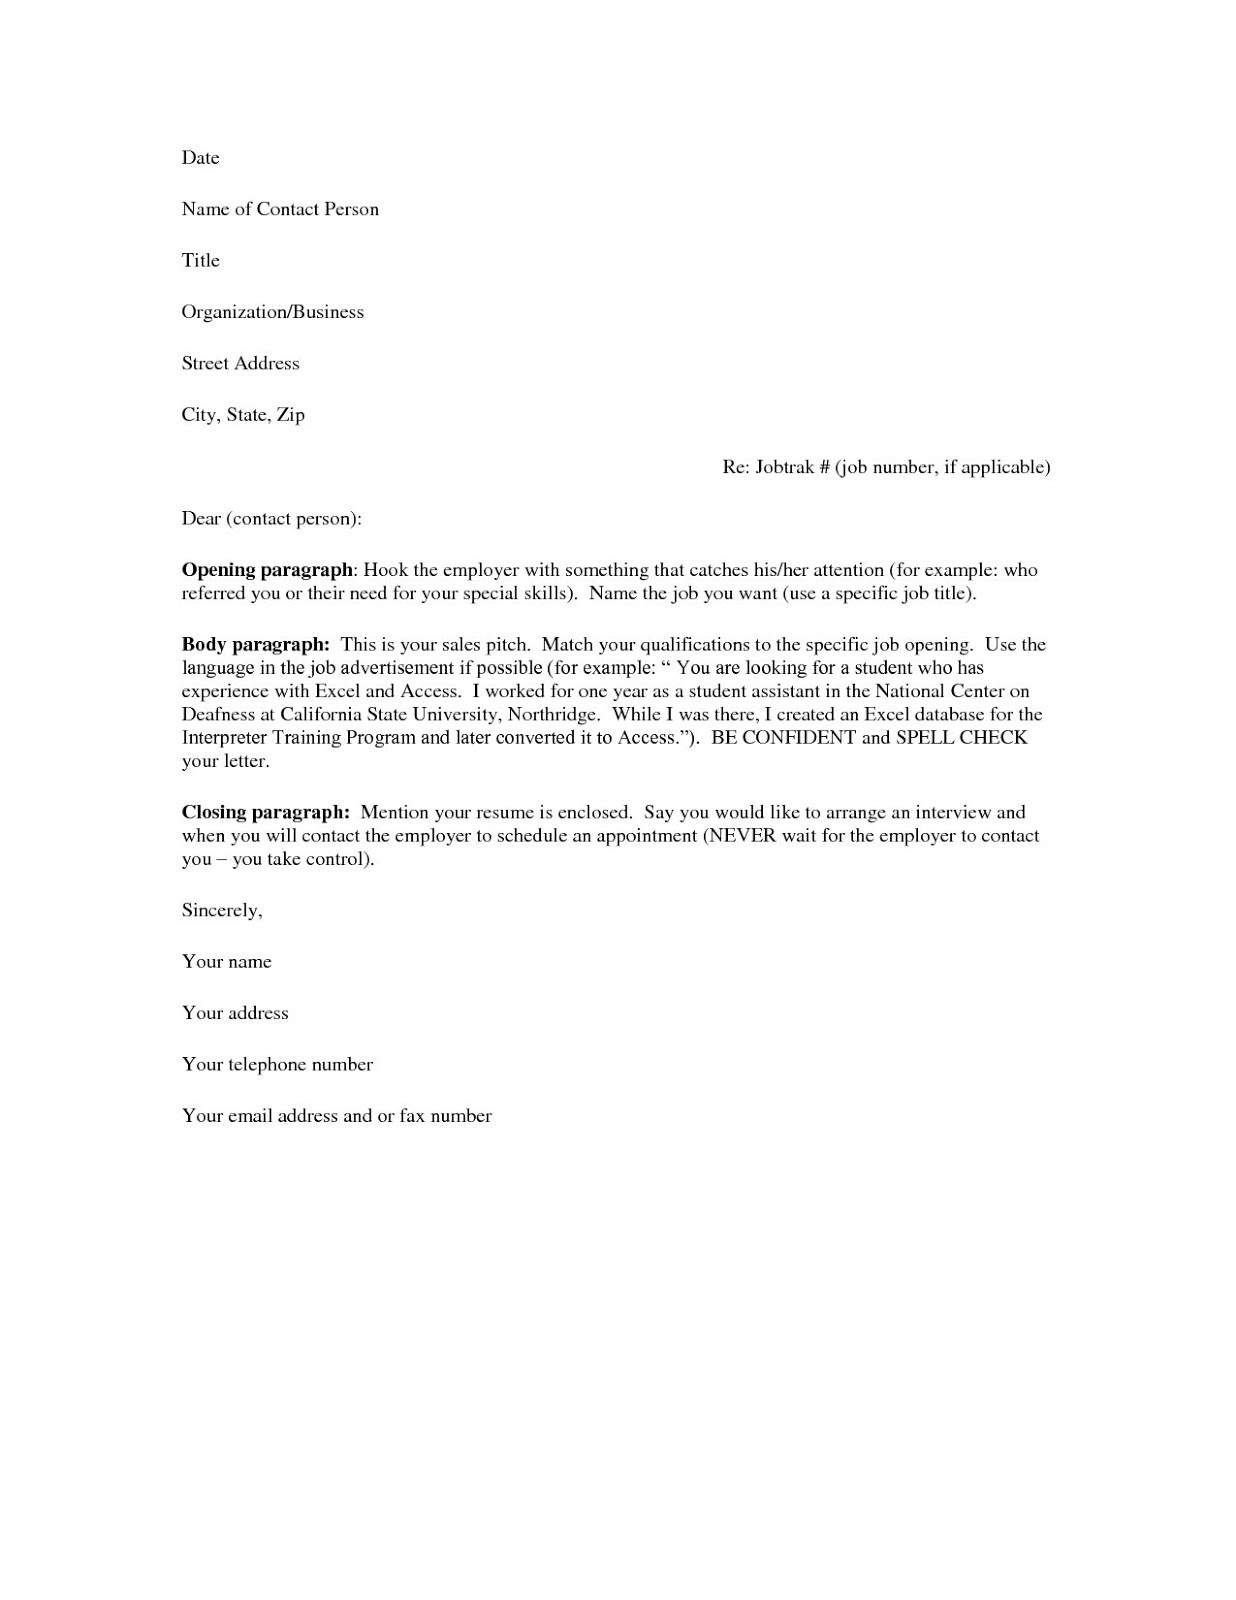 Resume and Cover Letter Samples Free Free Cover Letter Samples for Resumes